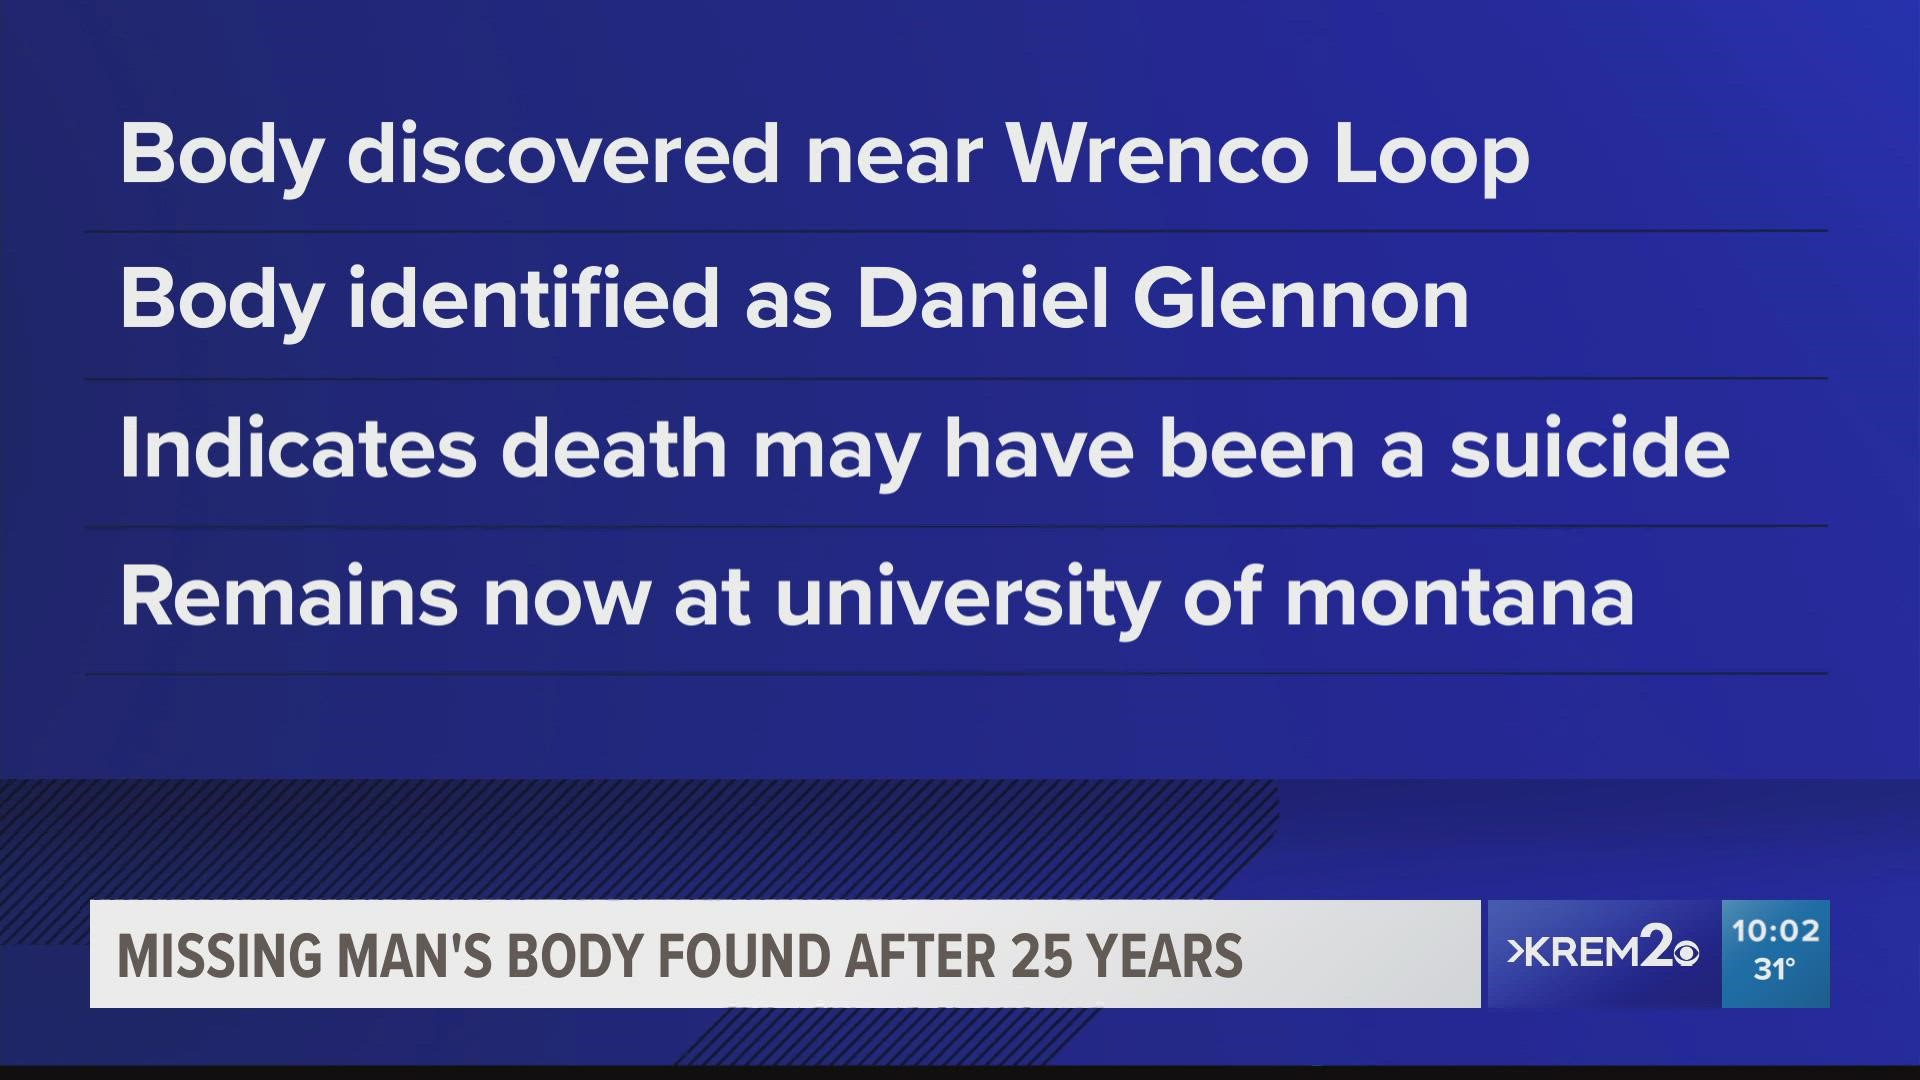 Daniel Glennon, who was 32 years old at the time he went missing, lived alone on Wrenco Loop and was last seen in Sandpoint in December of 1995.